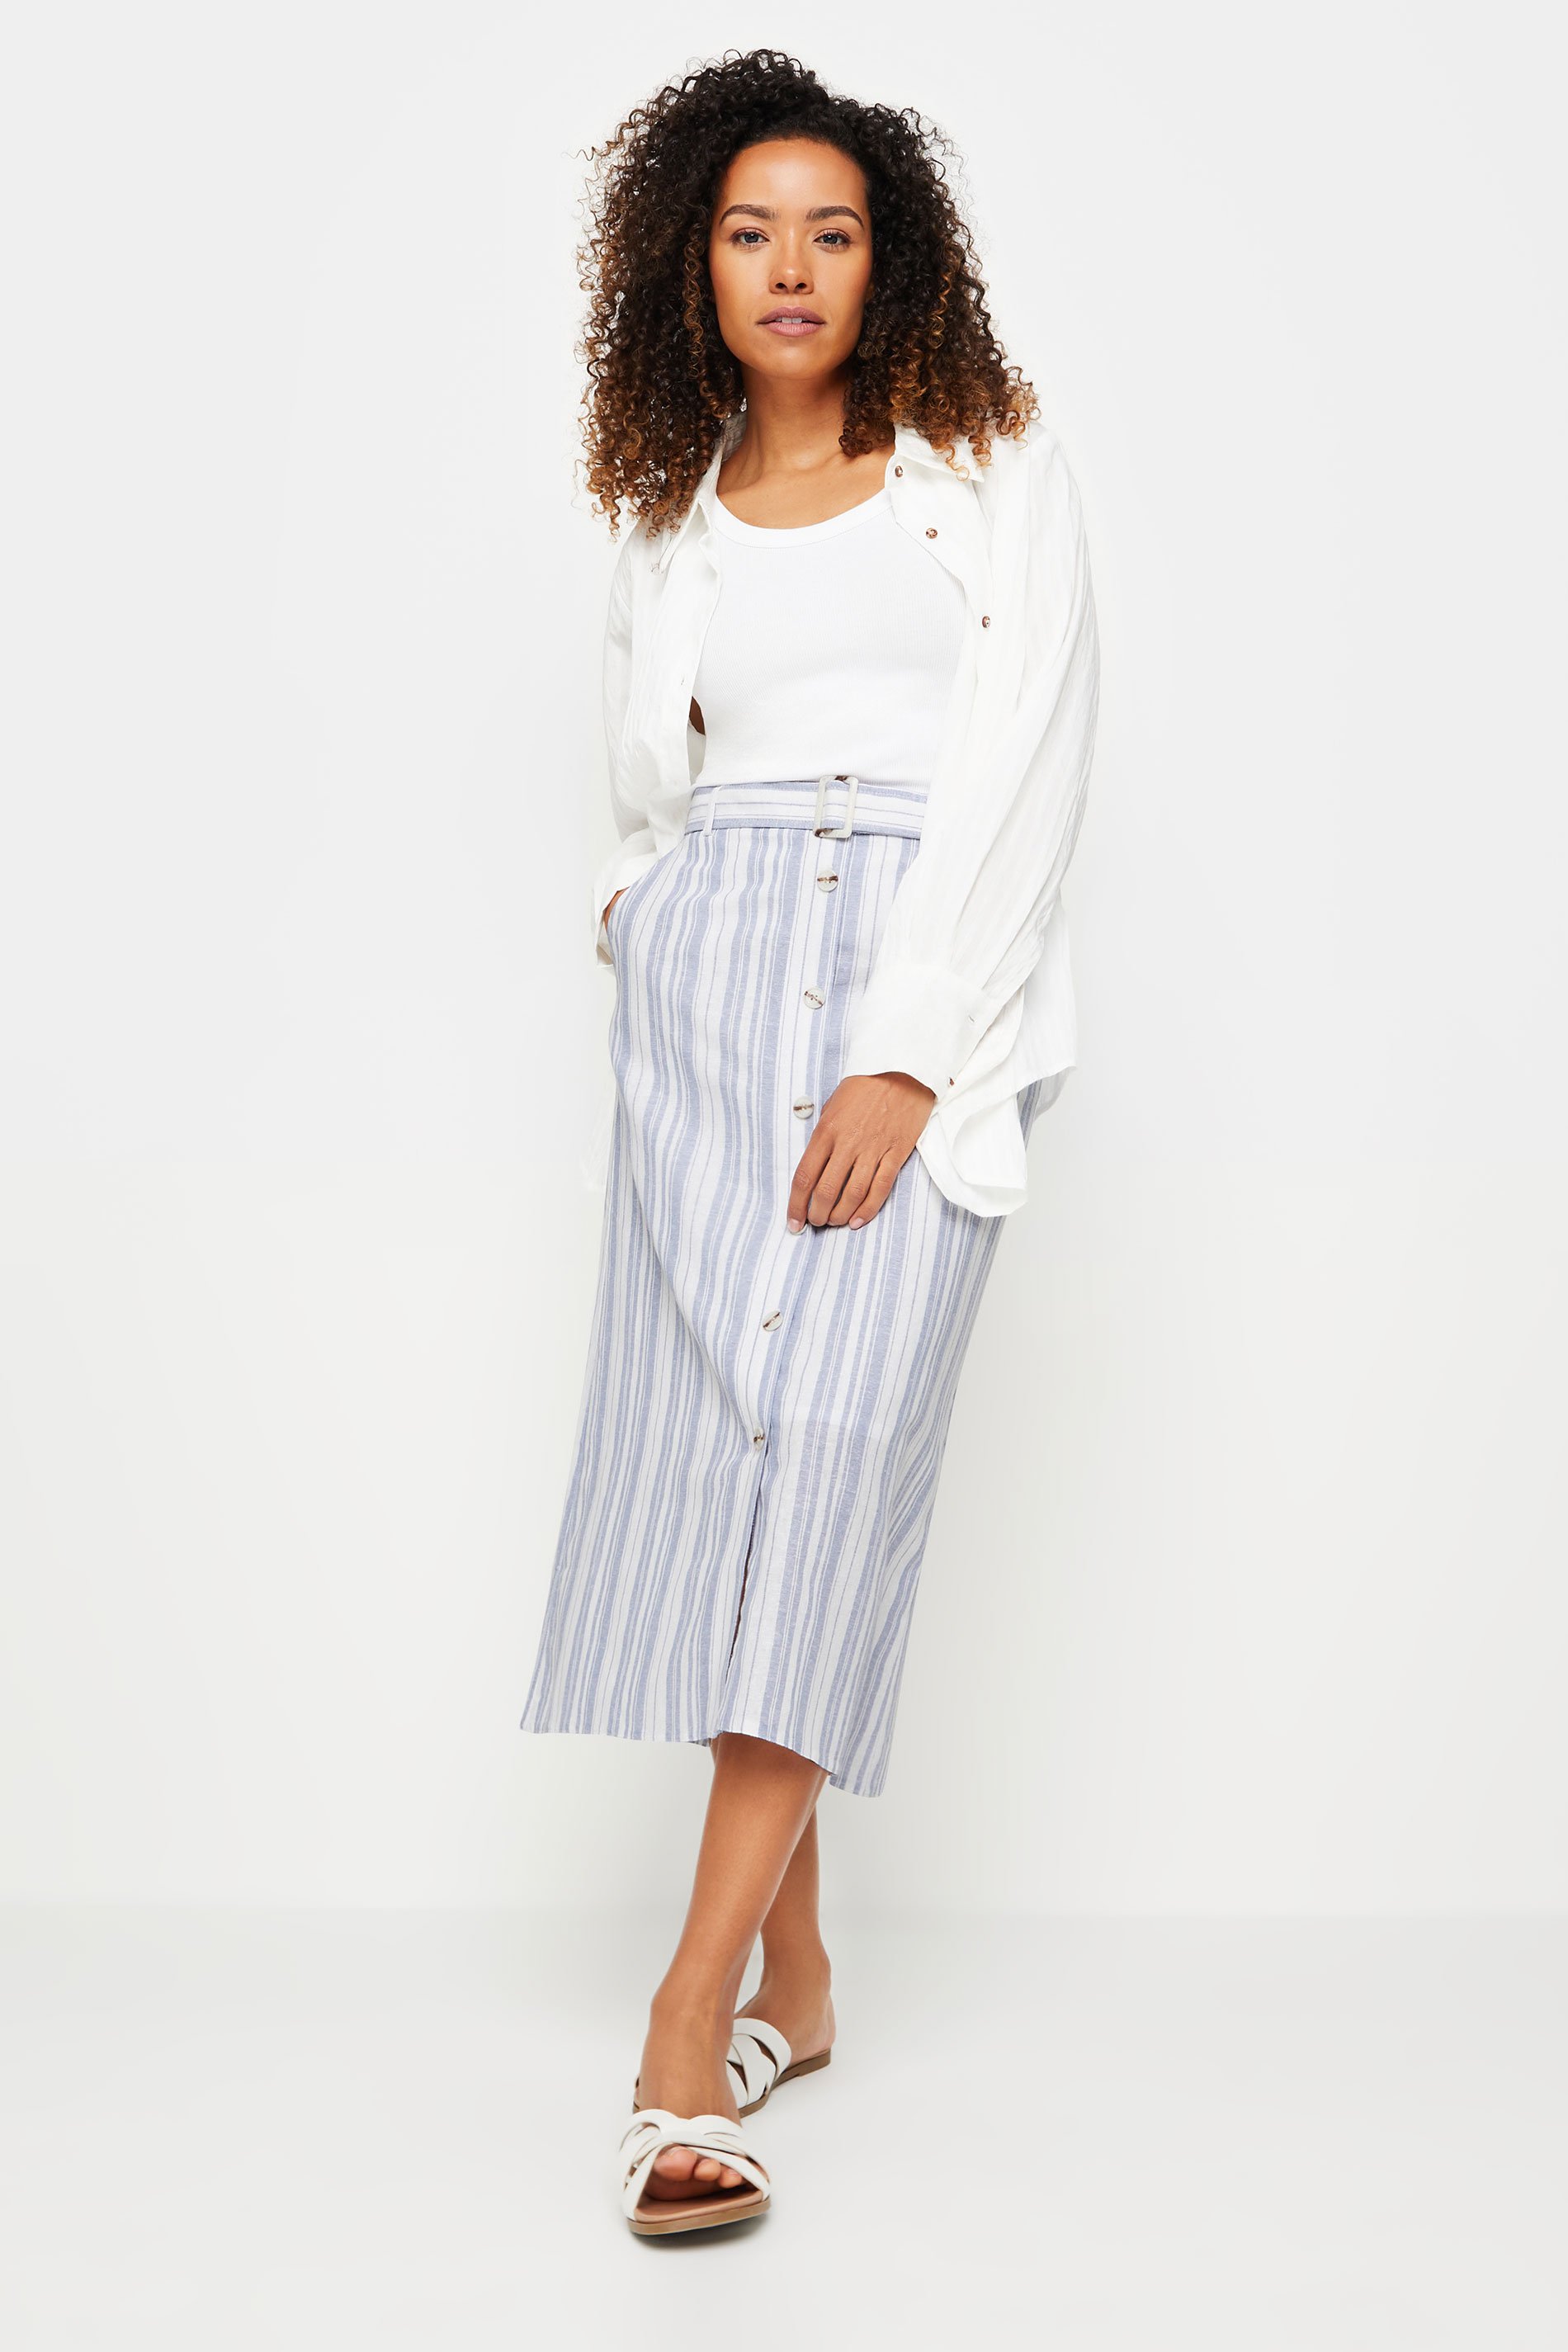 M&Co Blue & White Striped Belted Skirt | M&Co 2